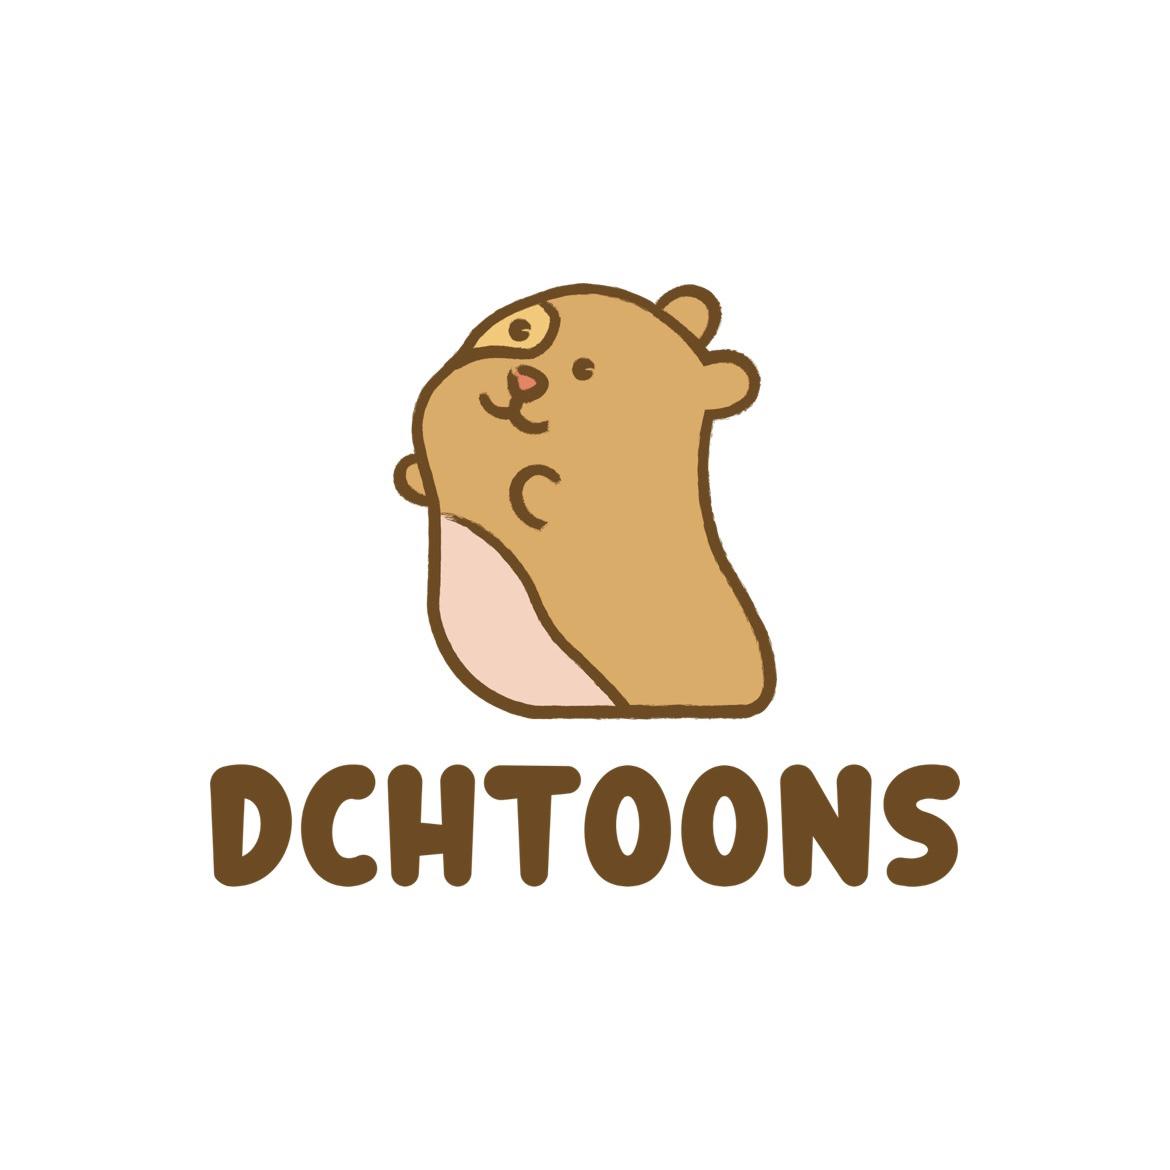 dchtoons 🐹's images